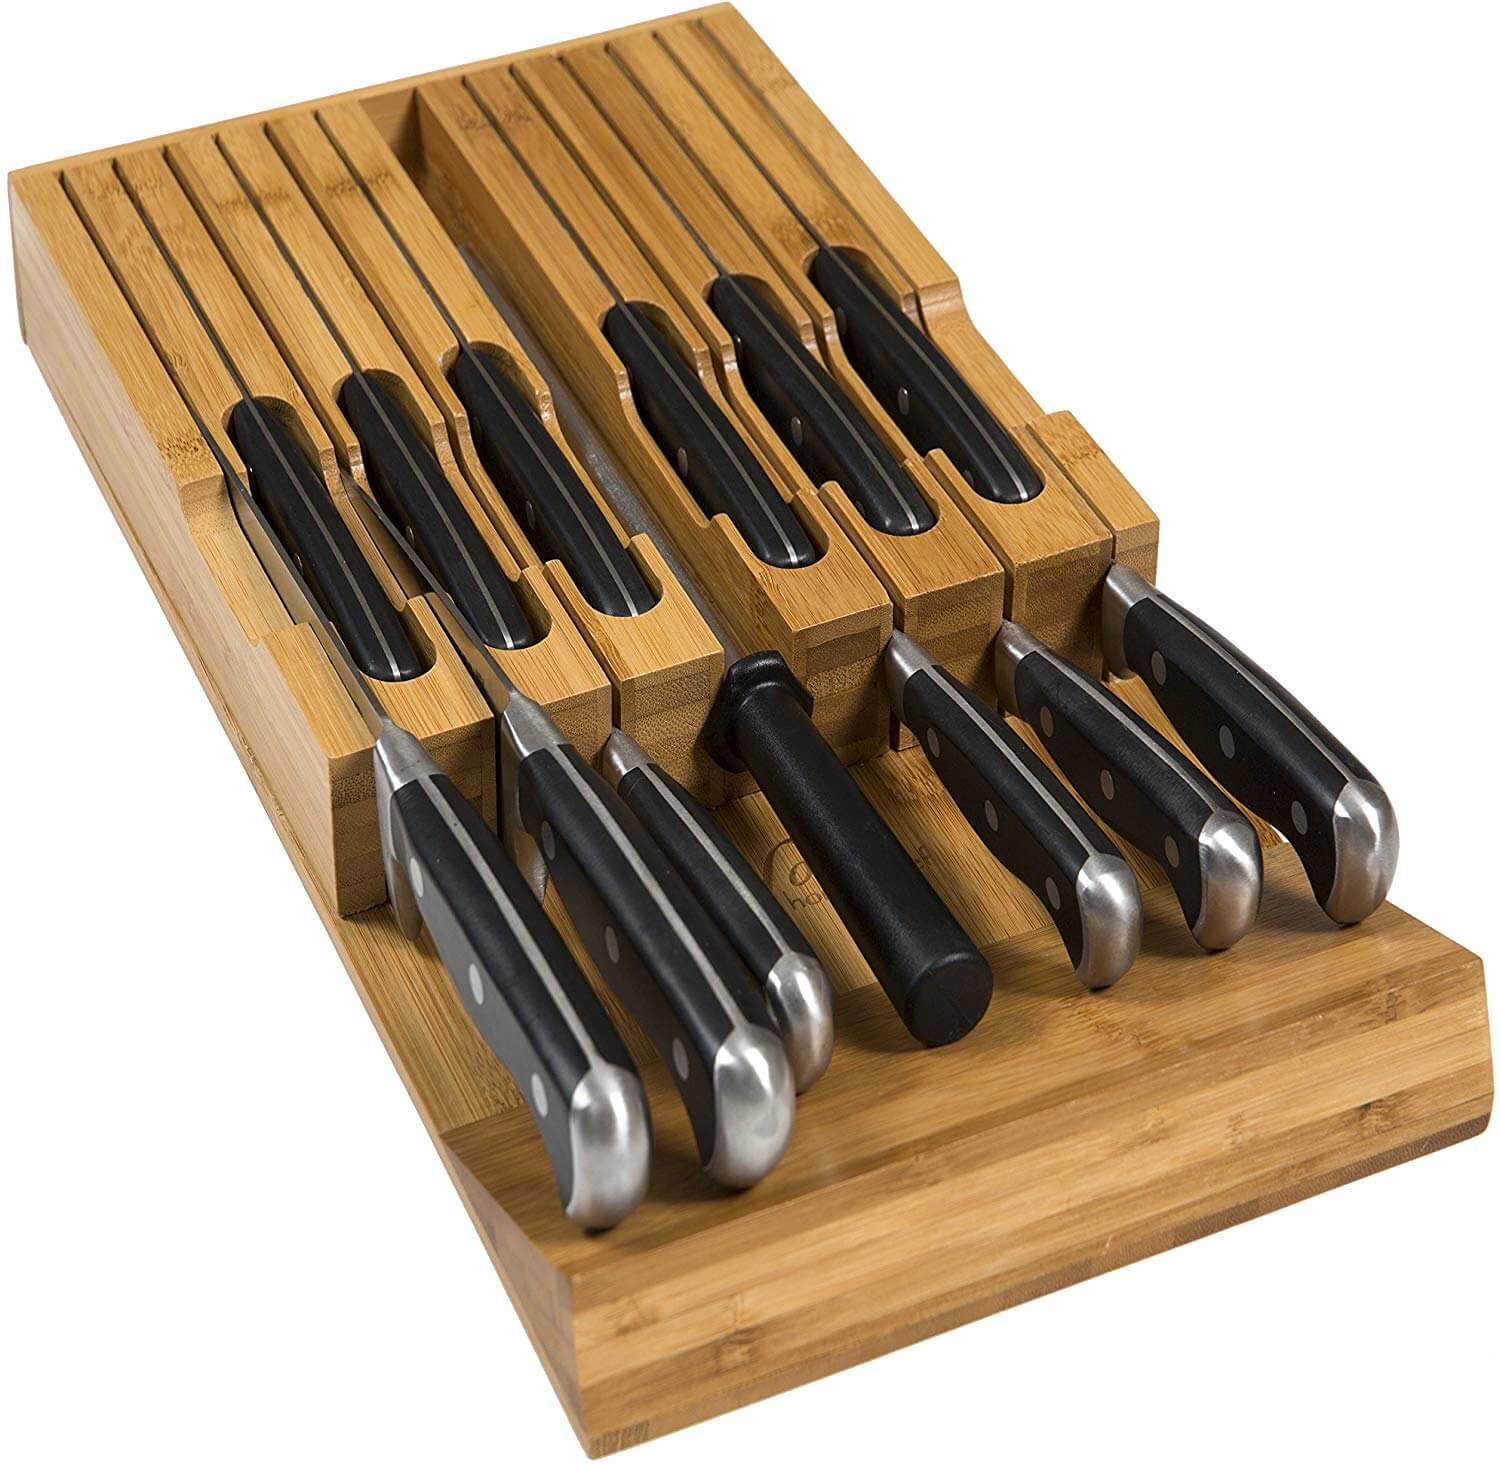 Not only is the knife block a solution for storing knives securely, it also reduces the risk of damage to blades (and fingers!) which can occur when you store your knives in a drawer